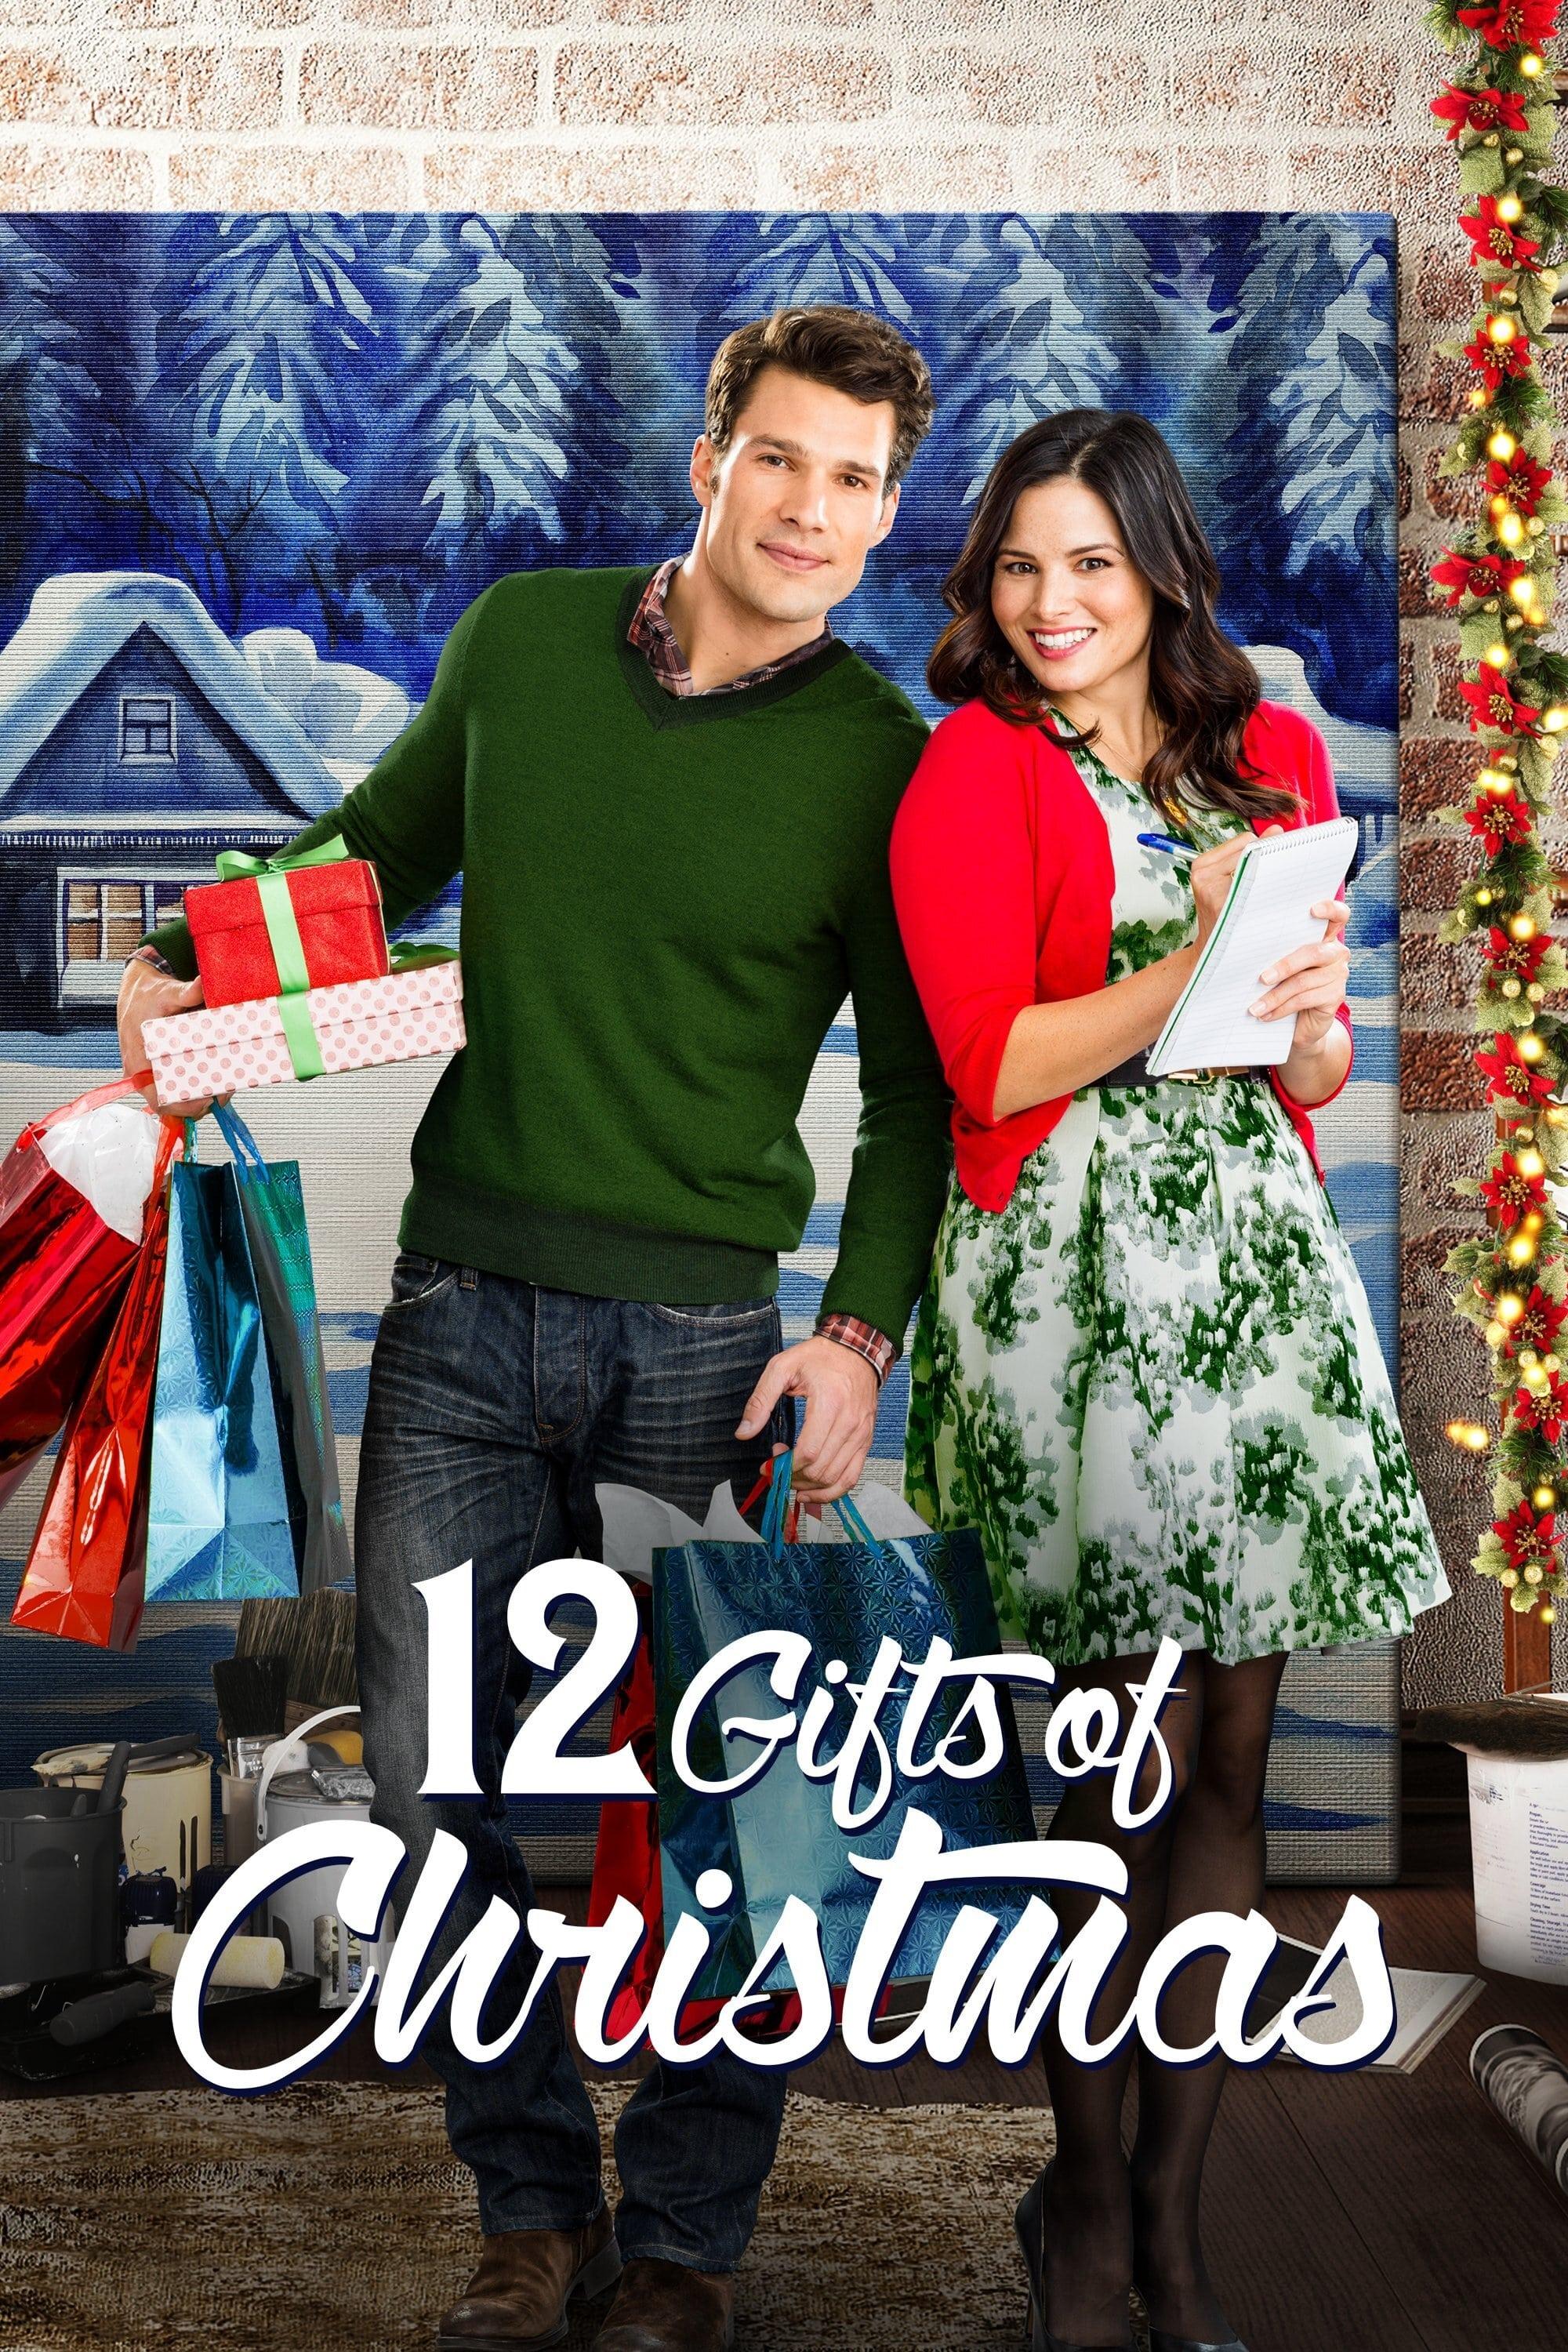 12 Gifts of Christmas poster